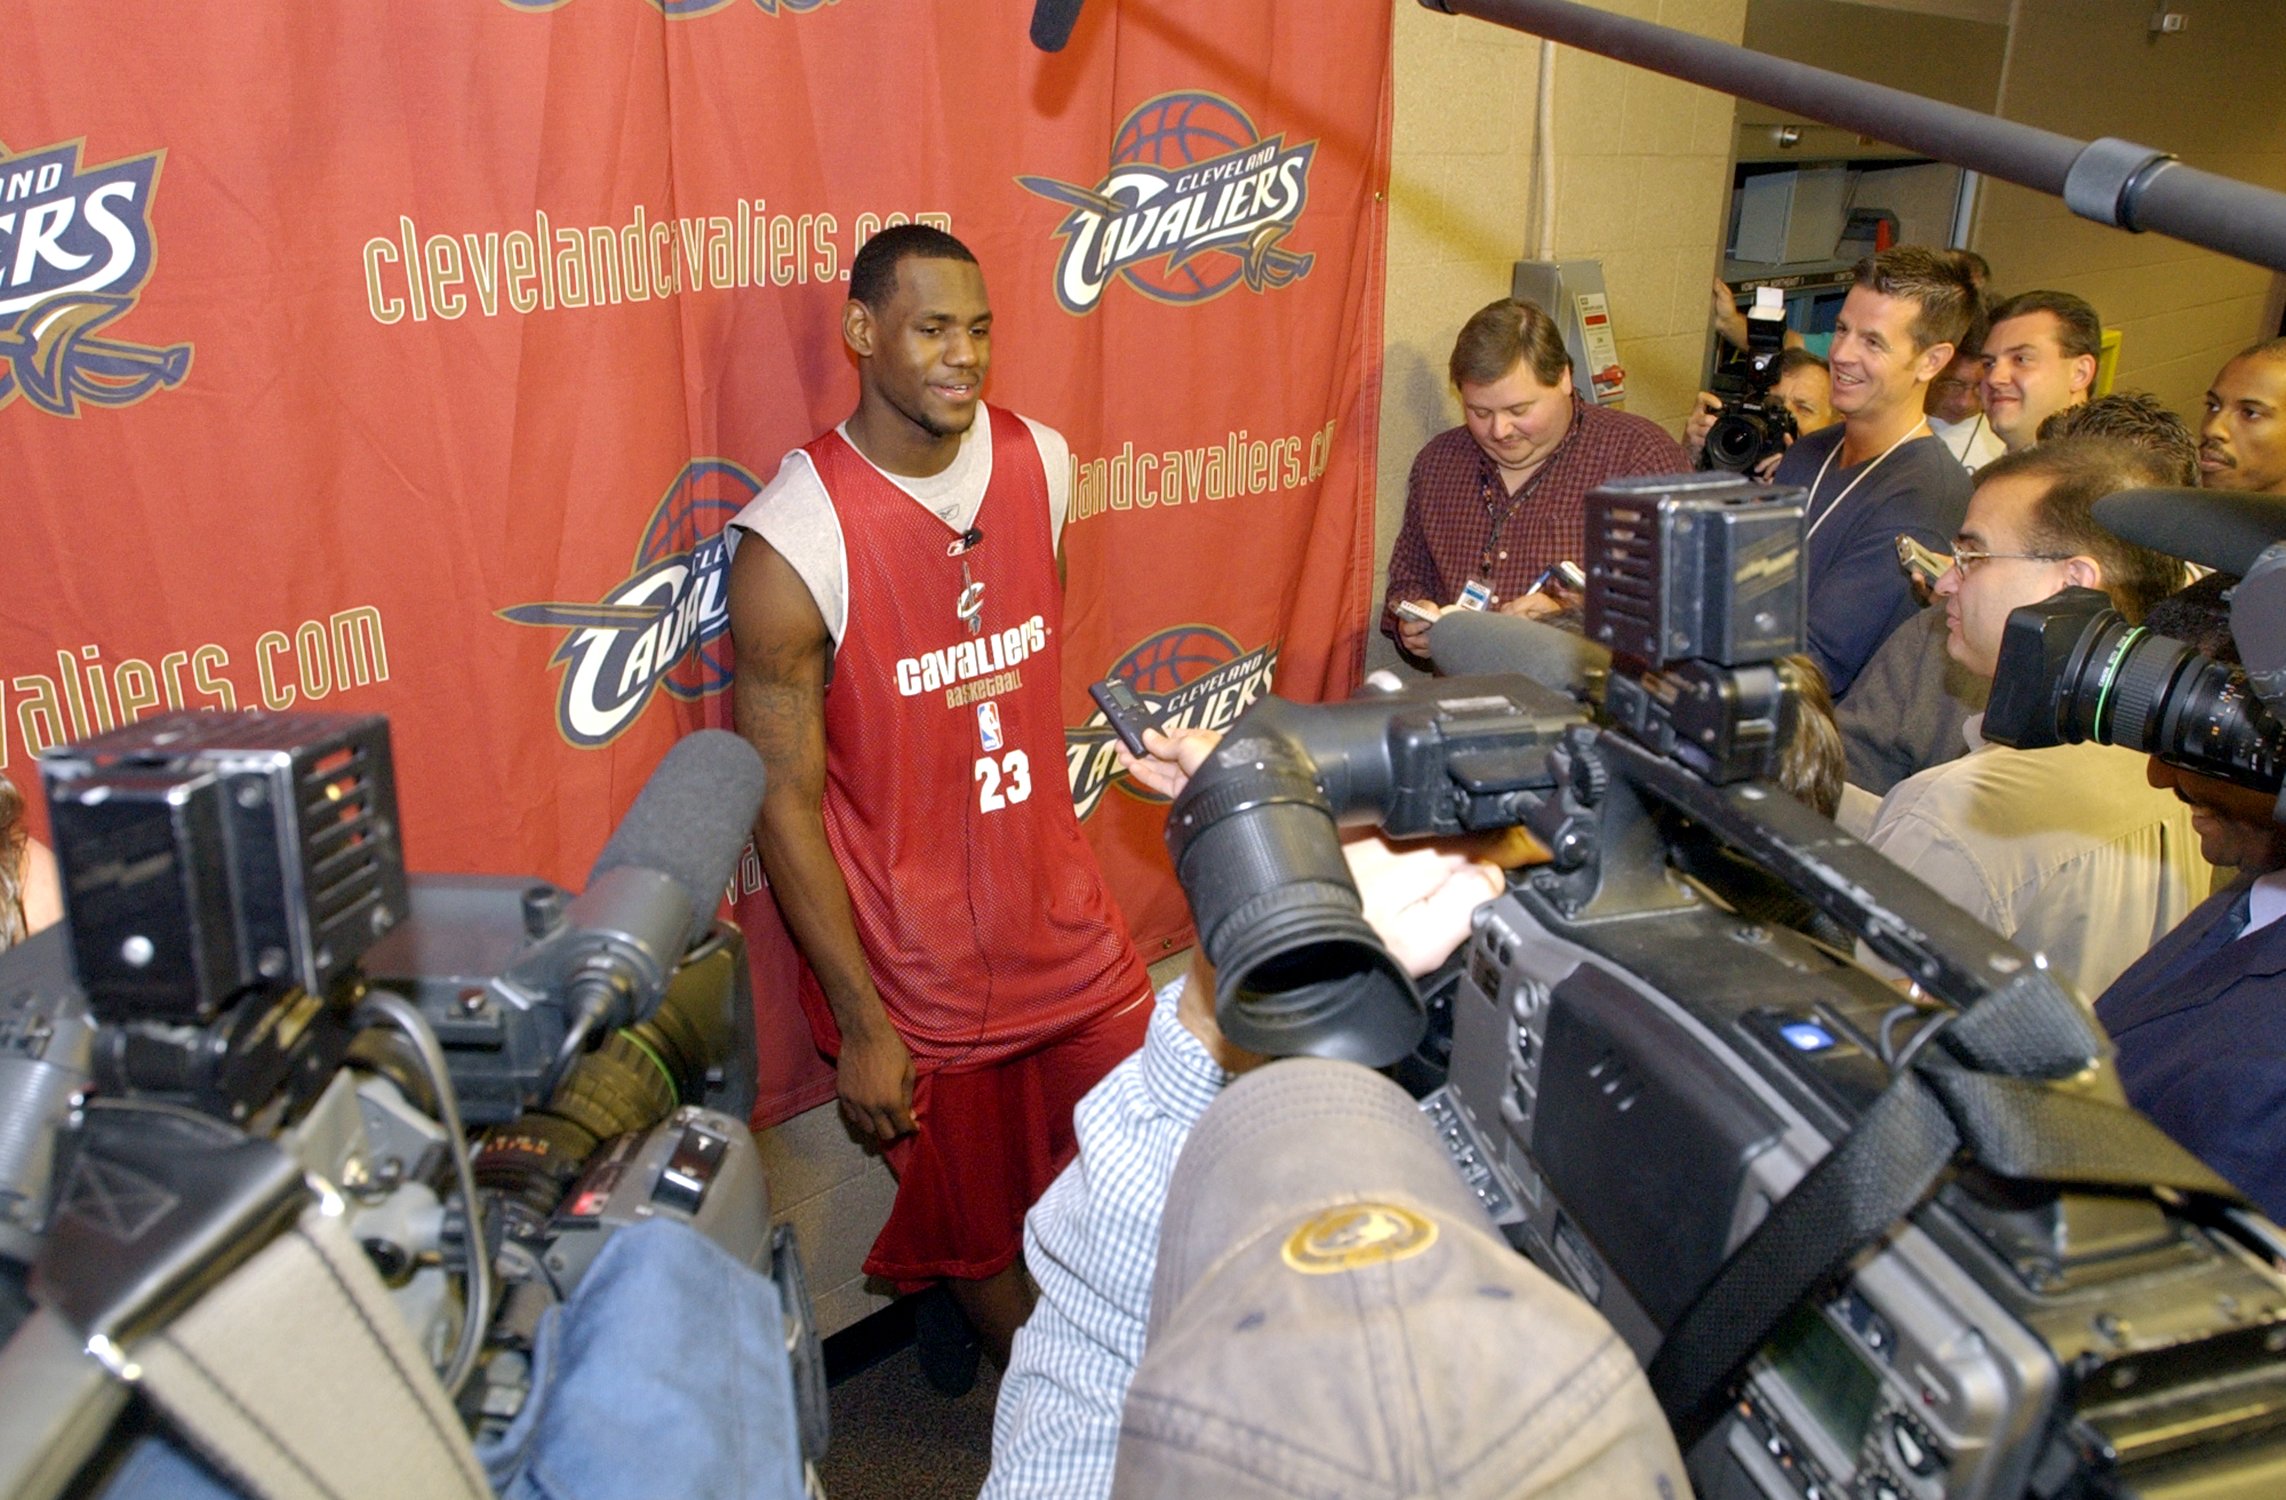 The bulk of the Cavaliers team was on hand for the first practice. LeBron James fields questions from a swarm of media personel attending the practice at Gund Arena.(Roadell Hickman/The Plain Dealer)